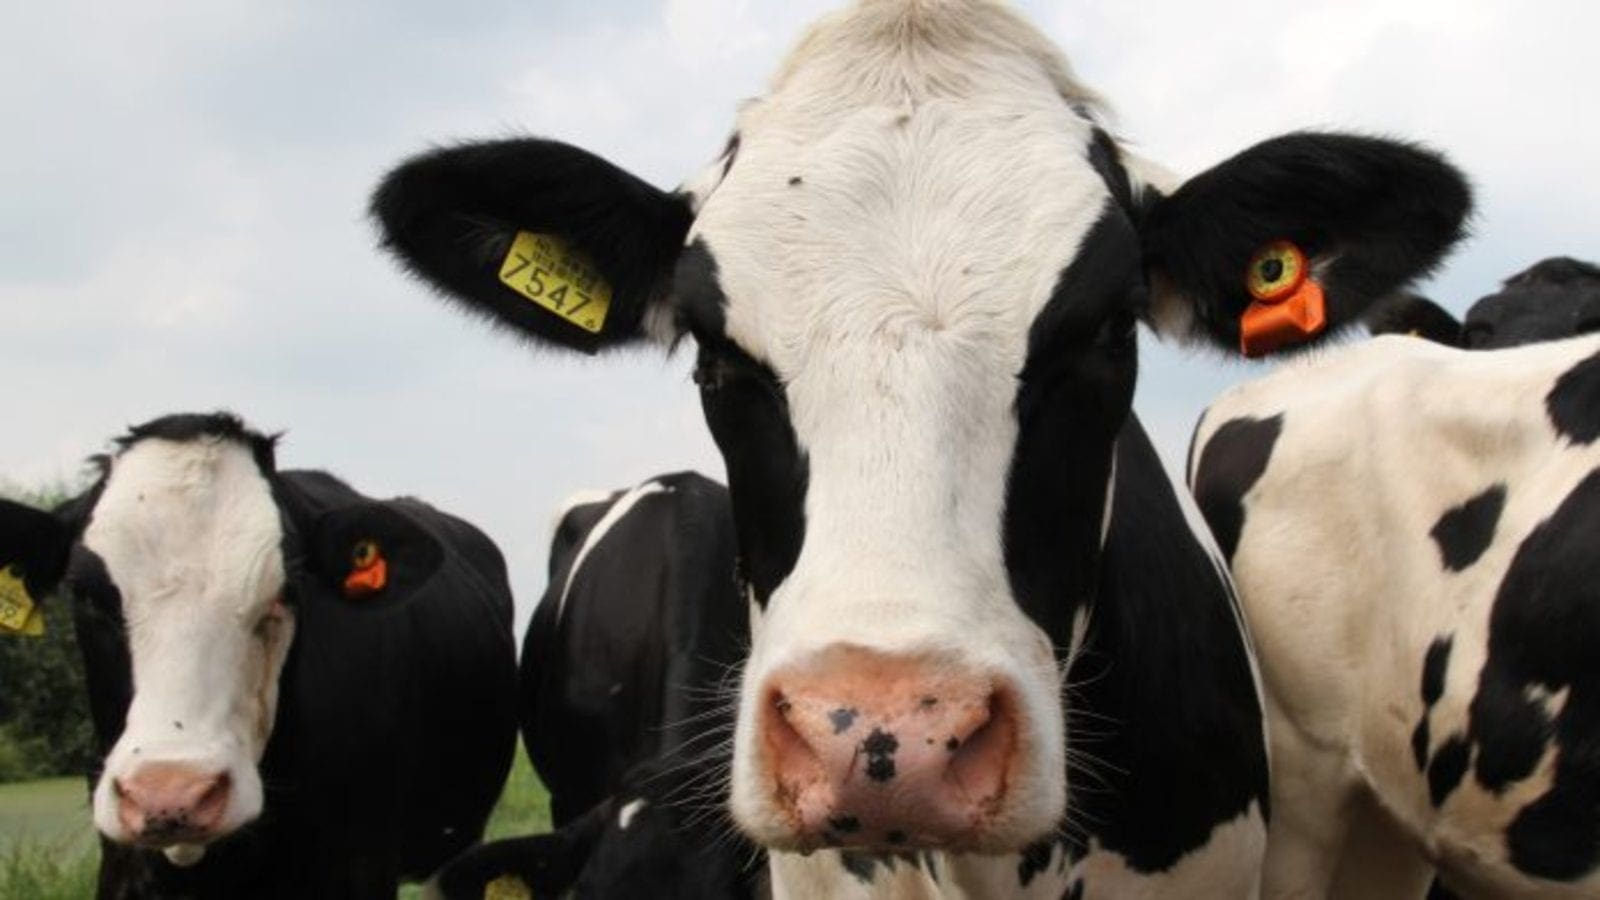 Müller doubles down on sustainable dairy farming as report identifies Europe’s largest carbon emitters